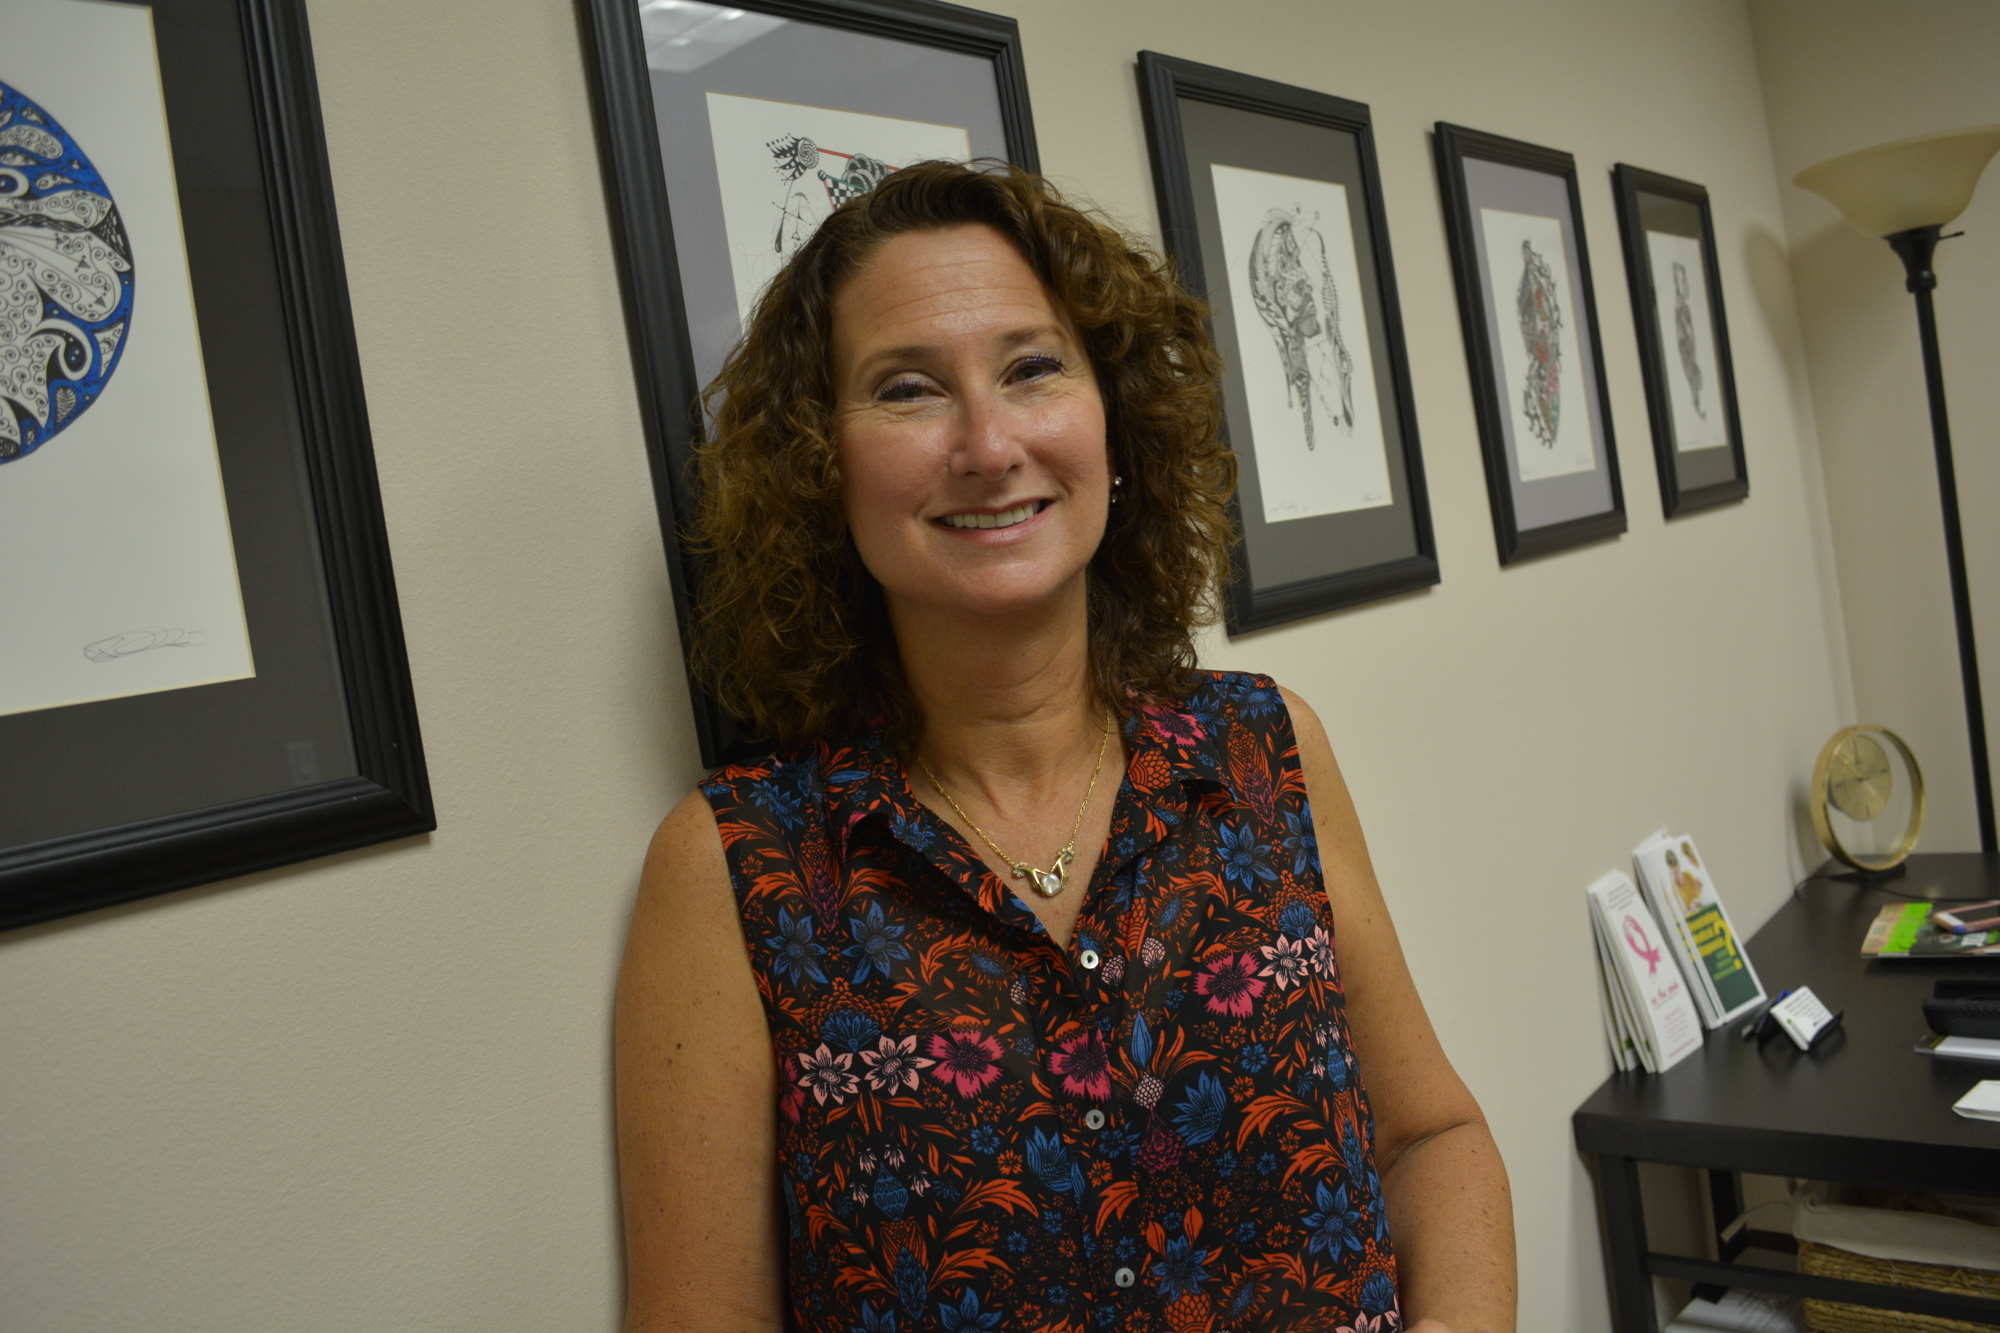 Andrea Feldmar has returned to her passion of counseling patients. She specializes in medical support counseling.